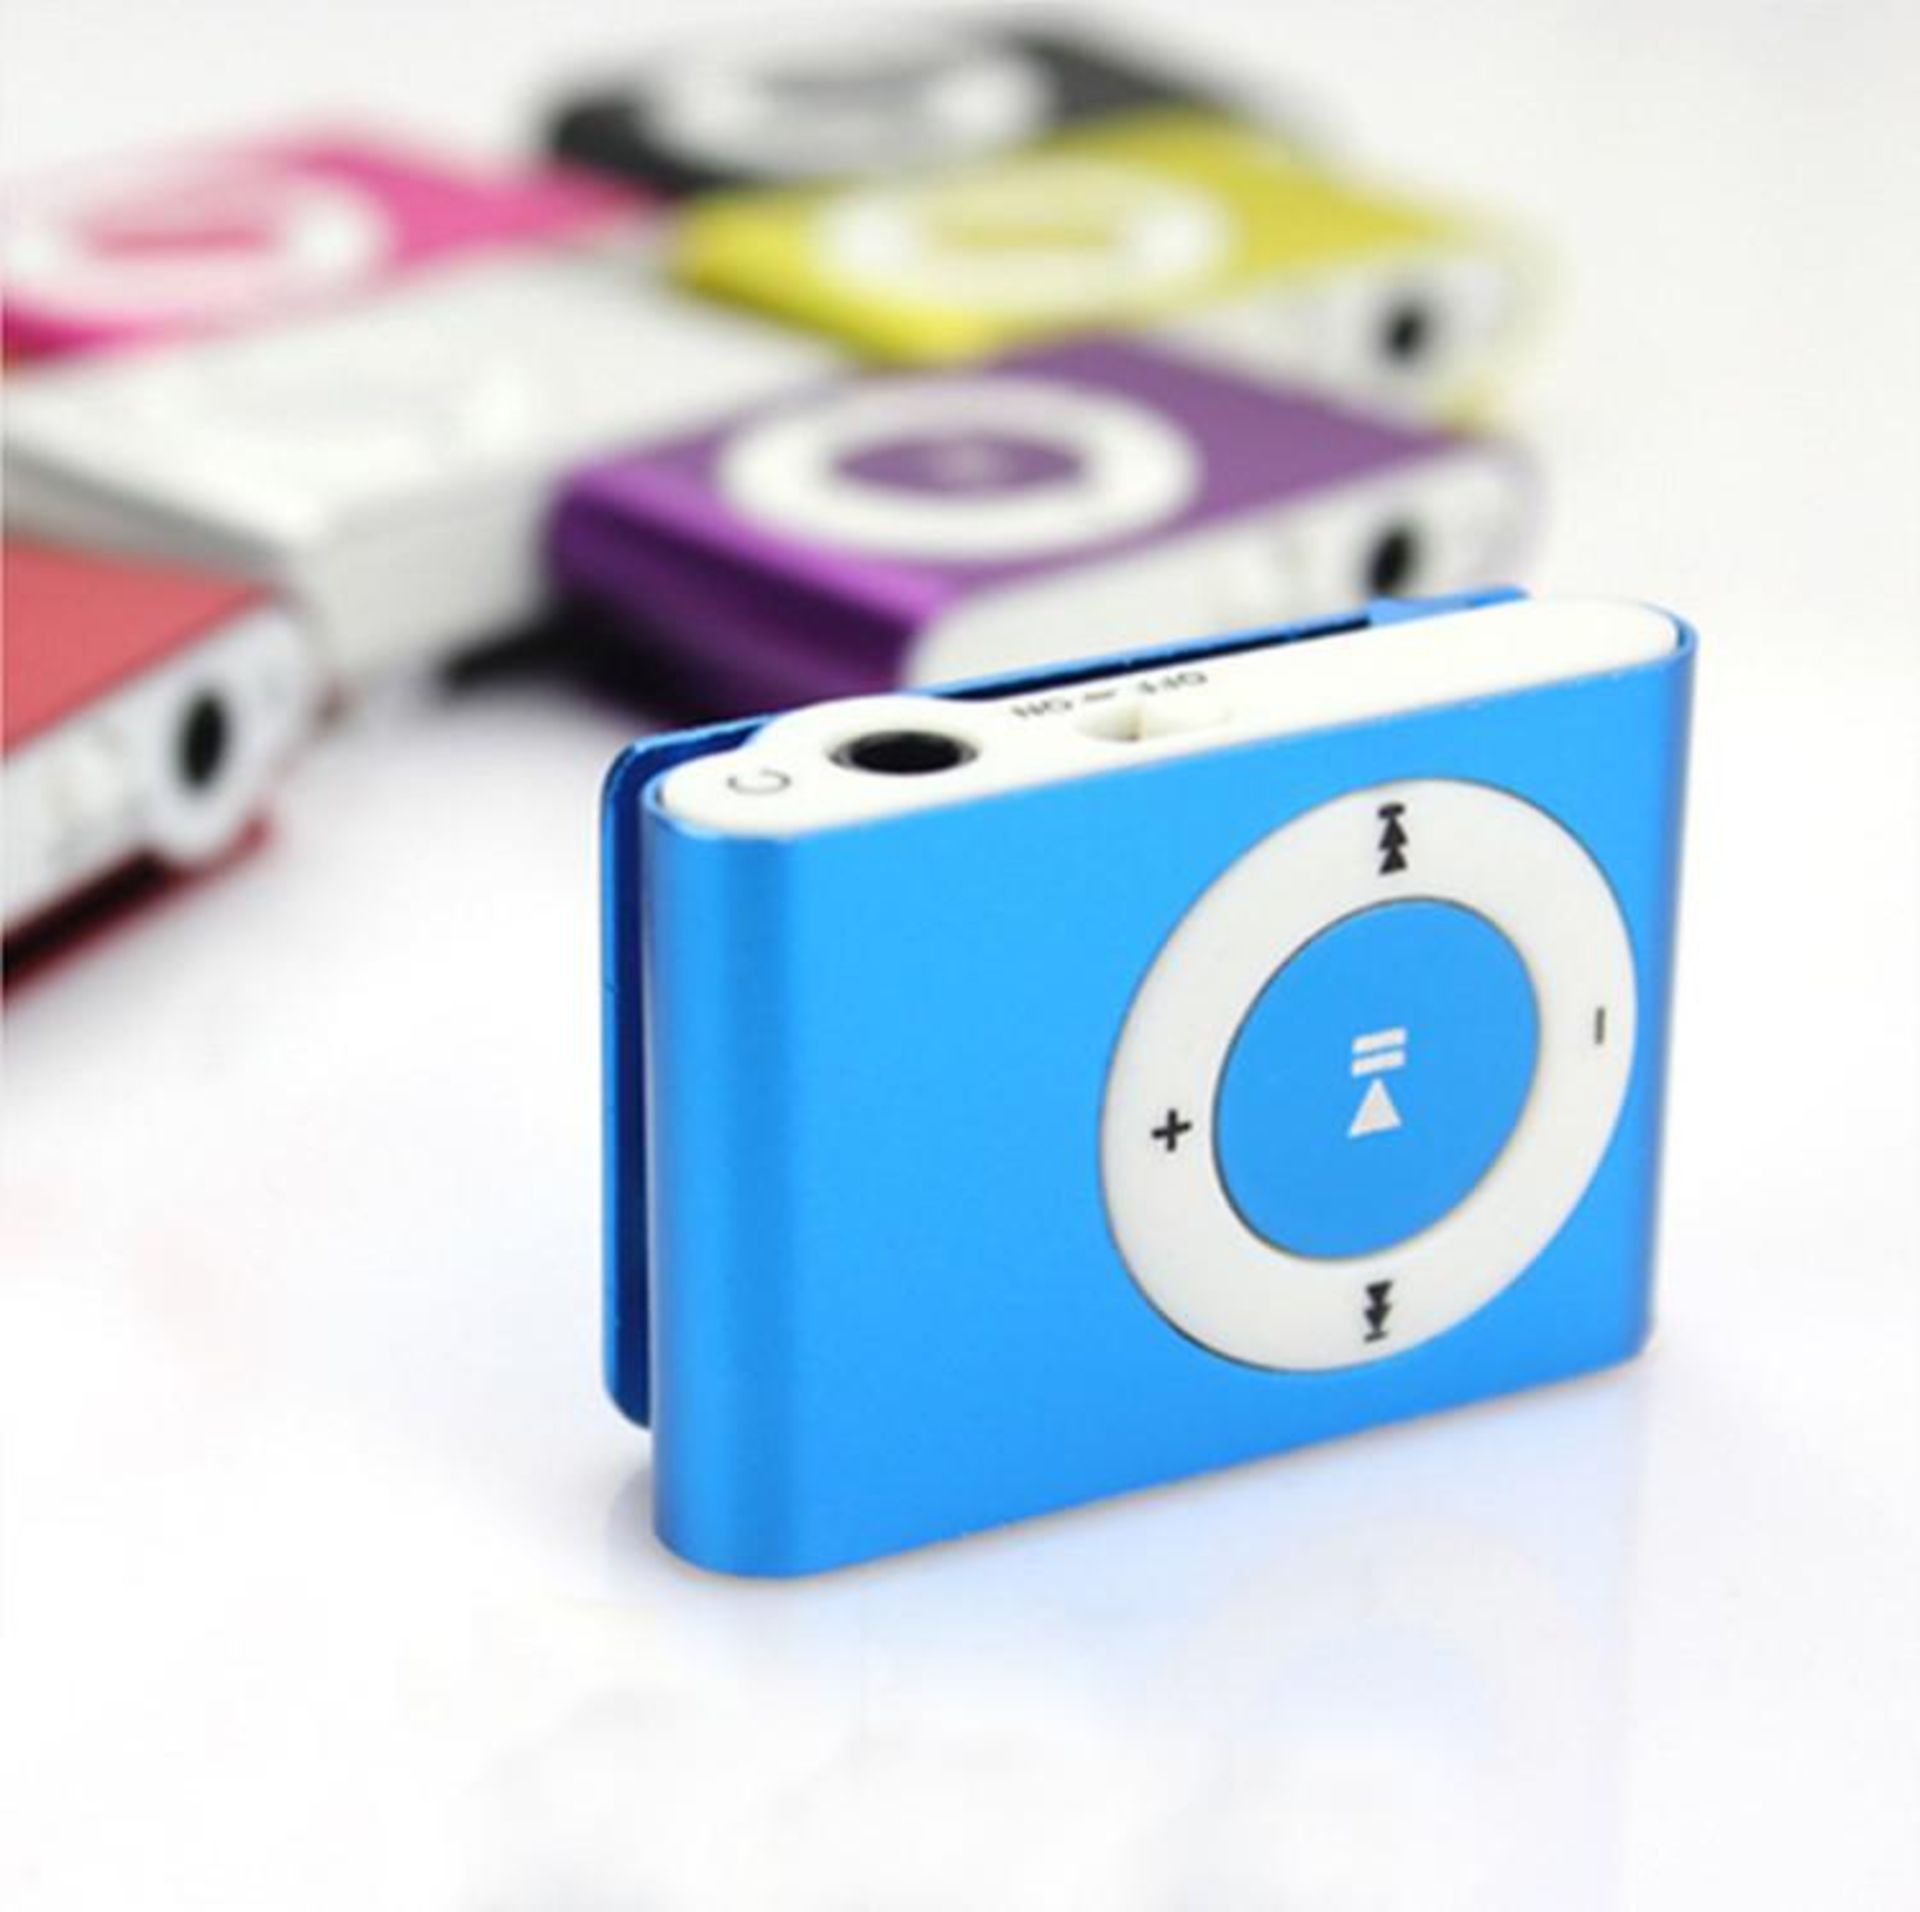 Brand New MP3 Player With Clip And Metal Construction - With USB Cable And Earphones - Colours May